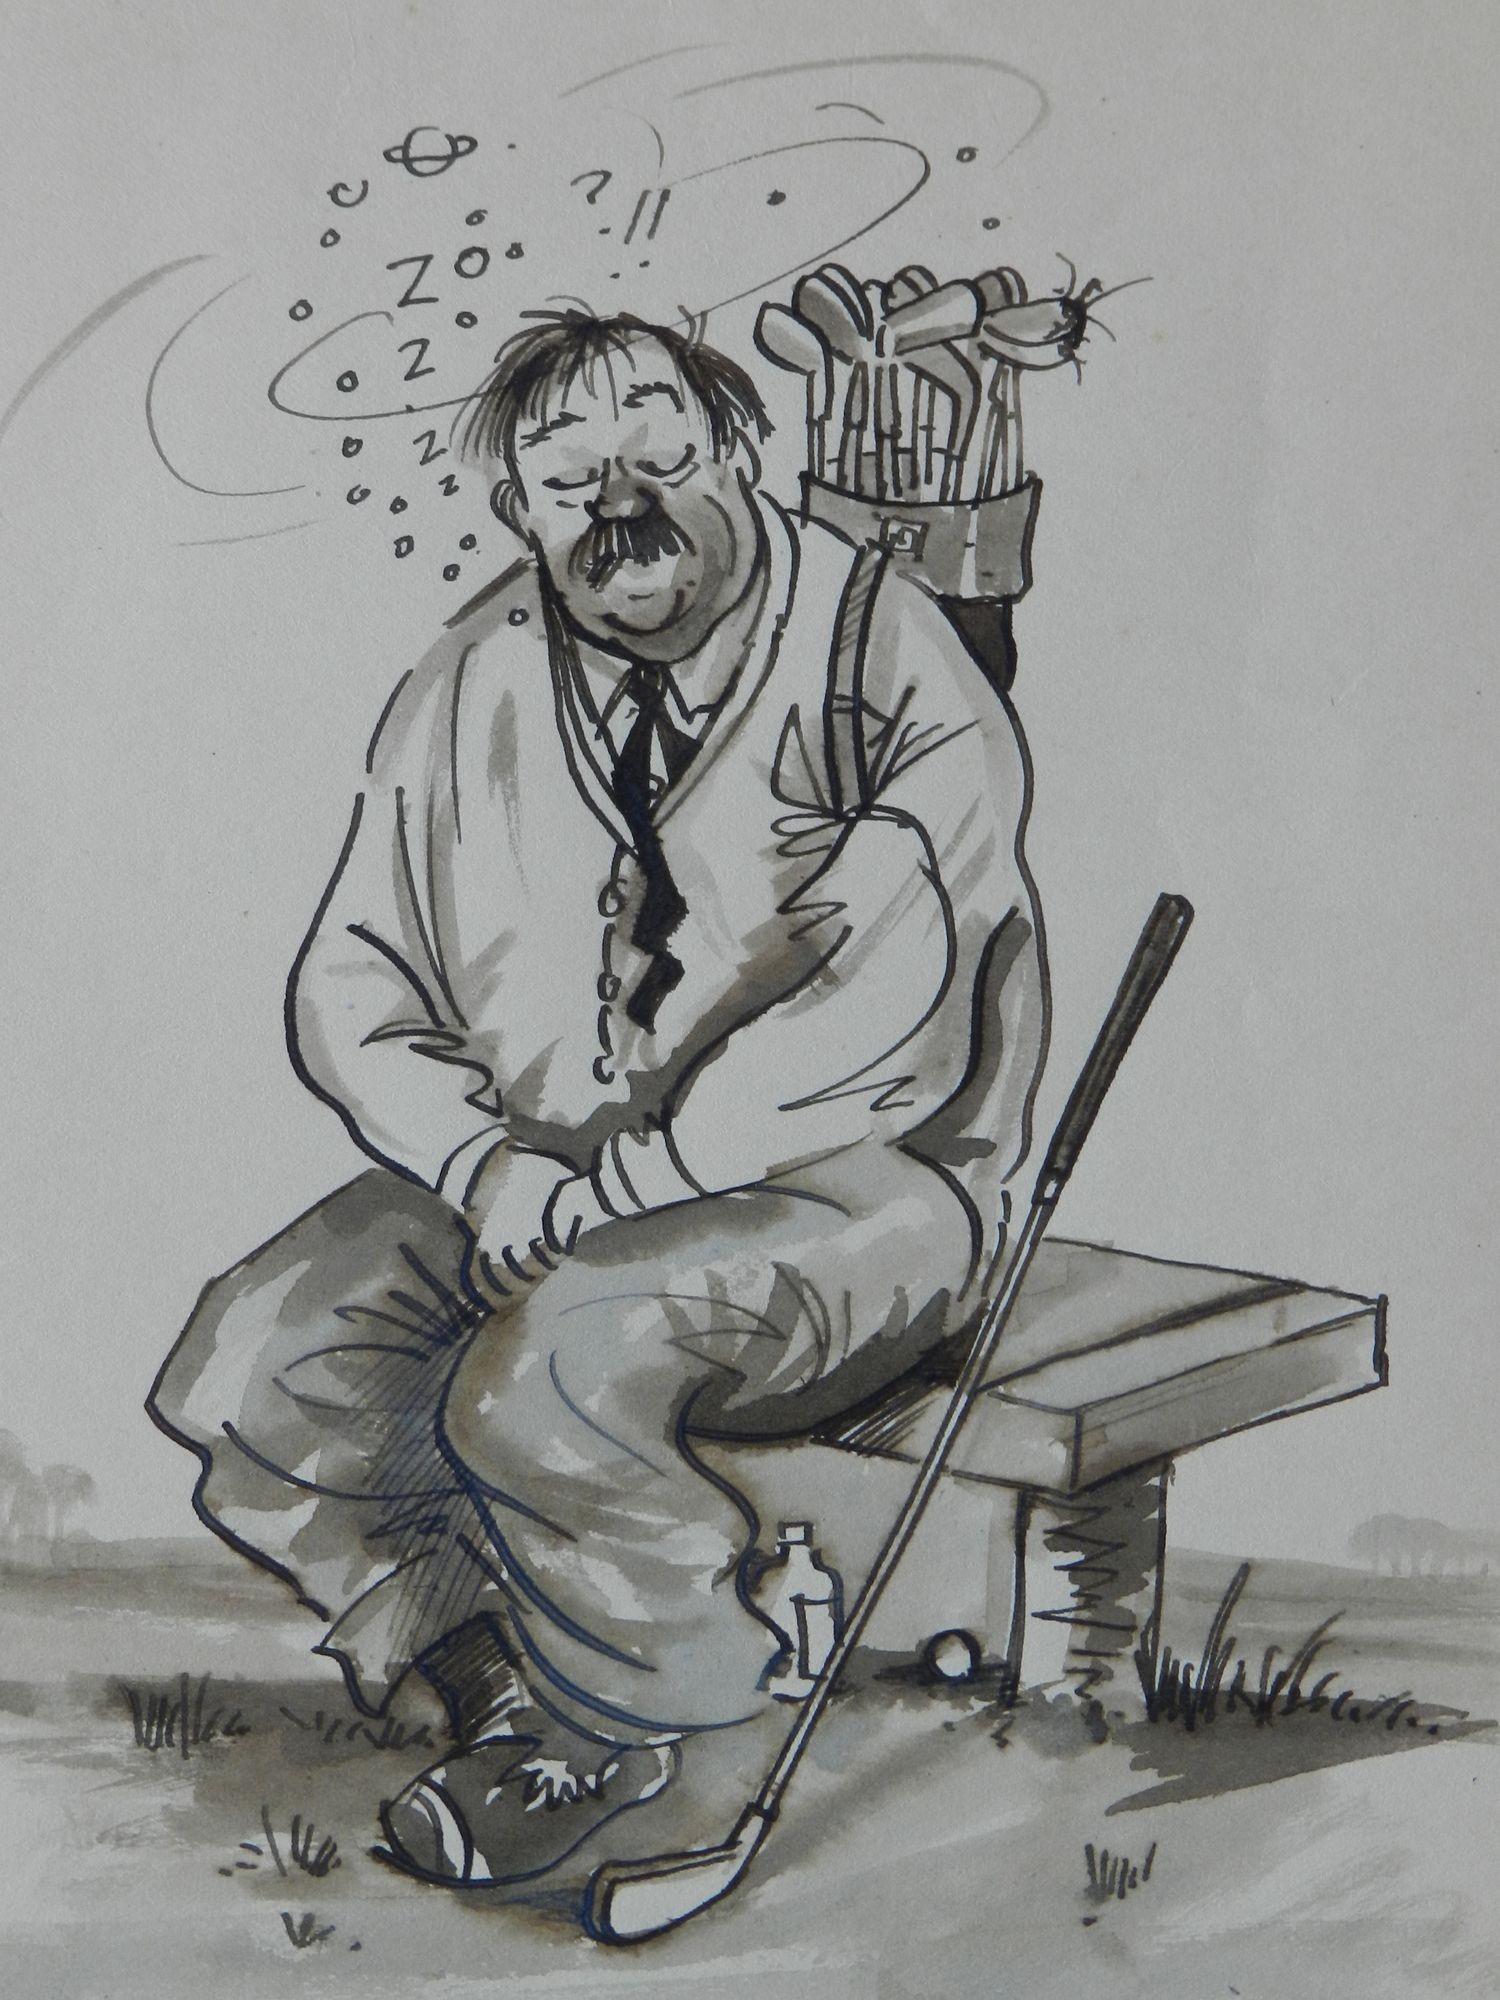 Drunken Golfer by Peter Hobbs Golf Original Painting Caricature c1950
Amusing original sketch caricature of a Golfer
The Drink
Ready to frame
From a series of golf caricatures by the UK artist Peter Hobbs, 1930-1994.
Peter Hobbs was a professional